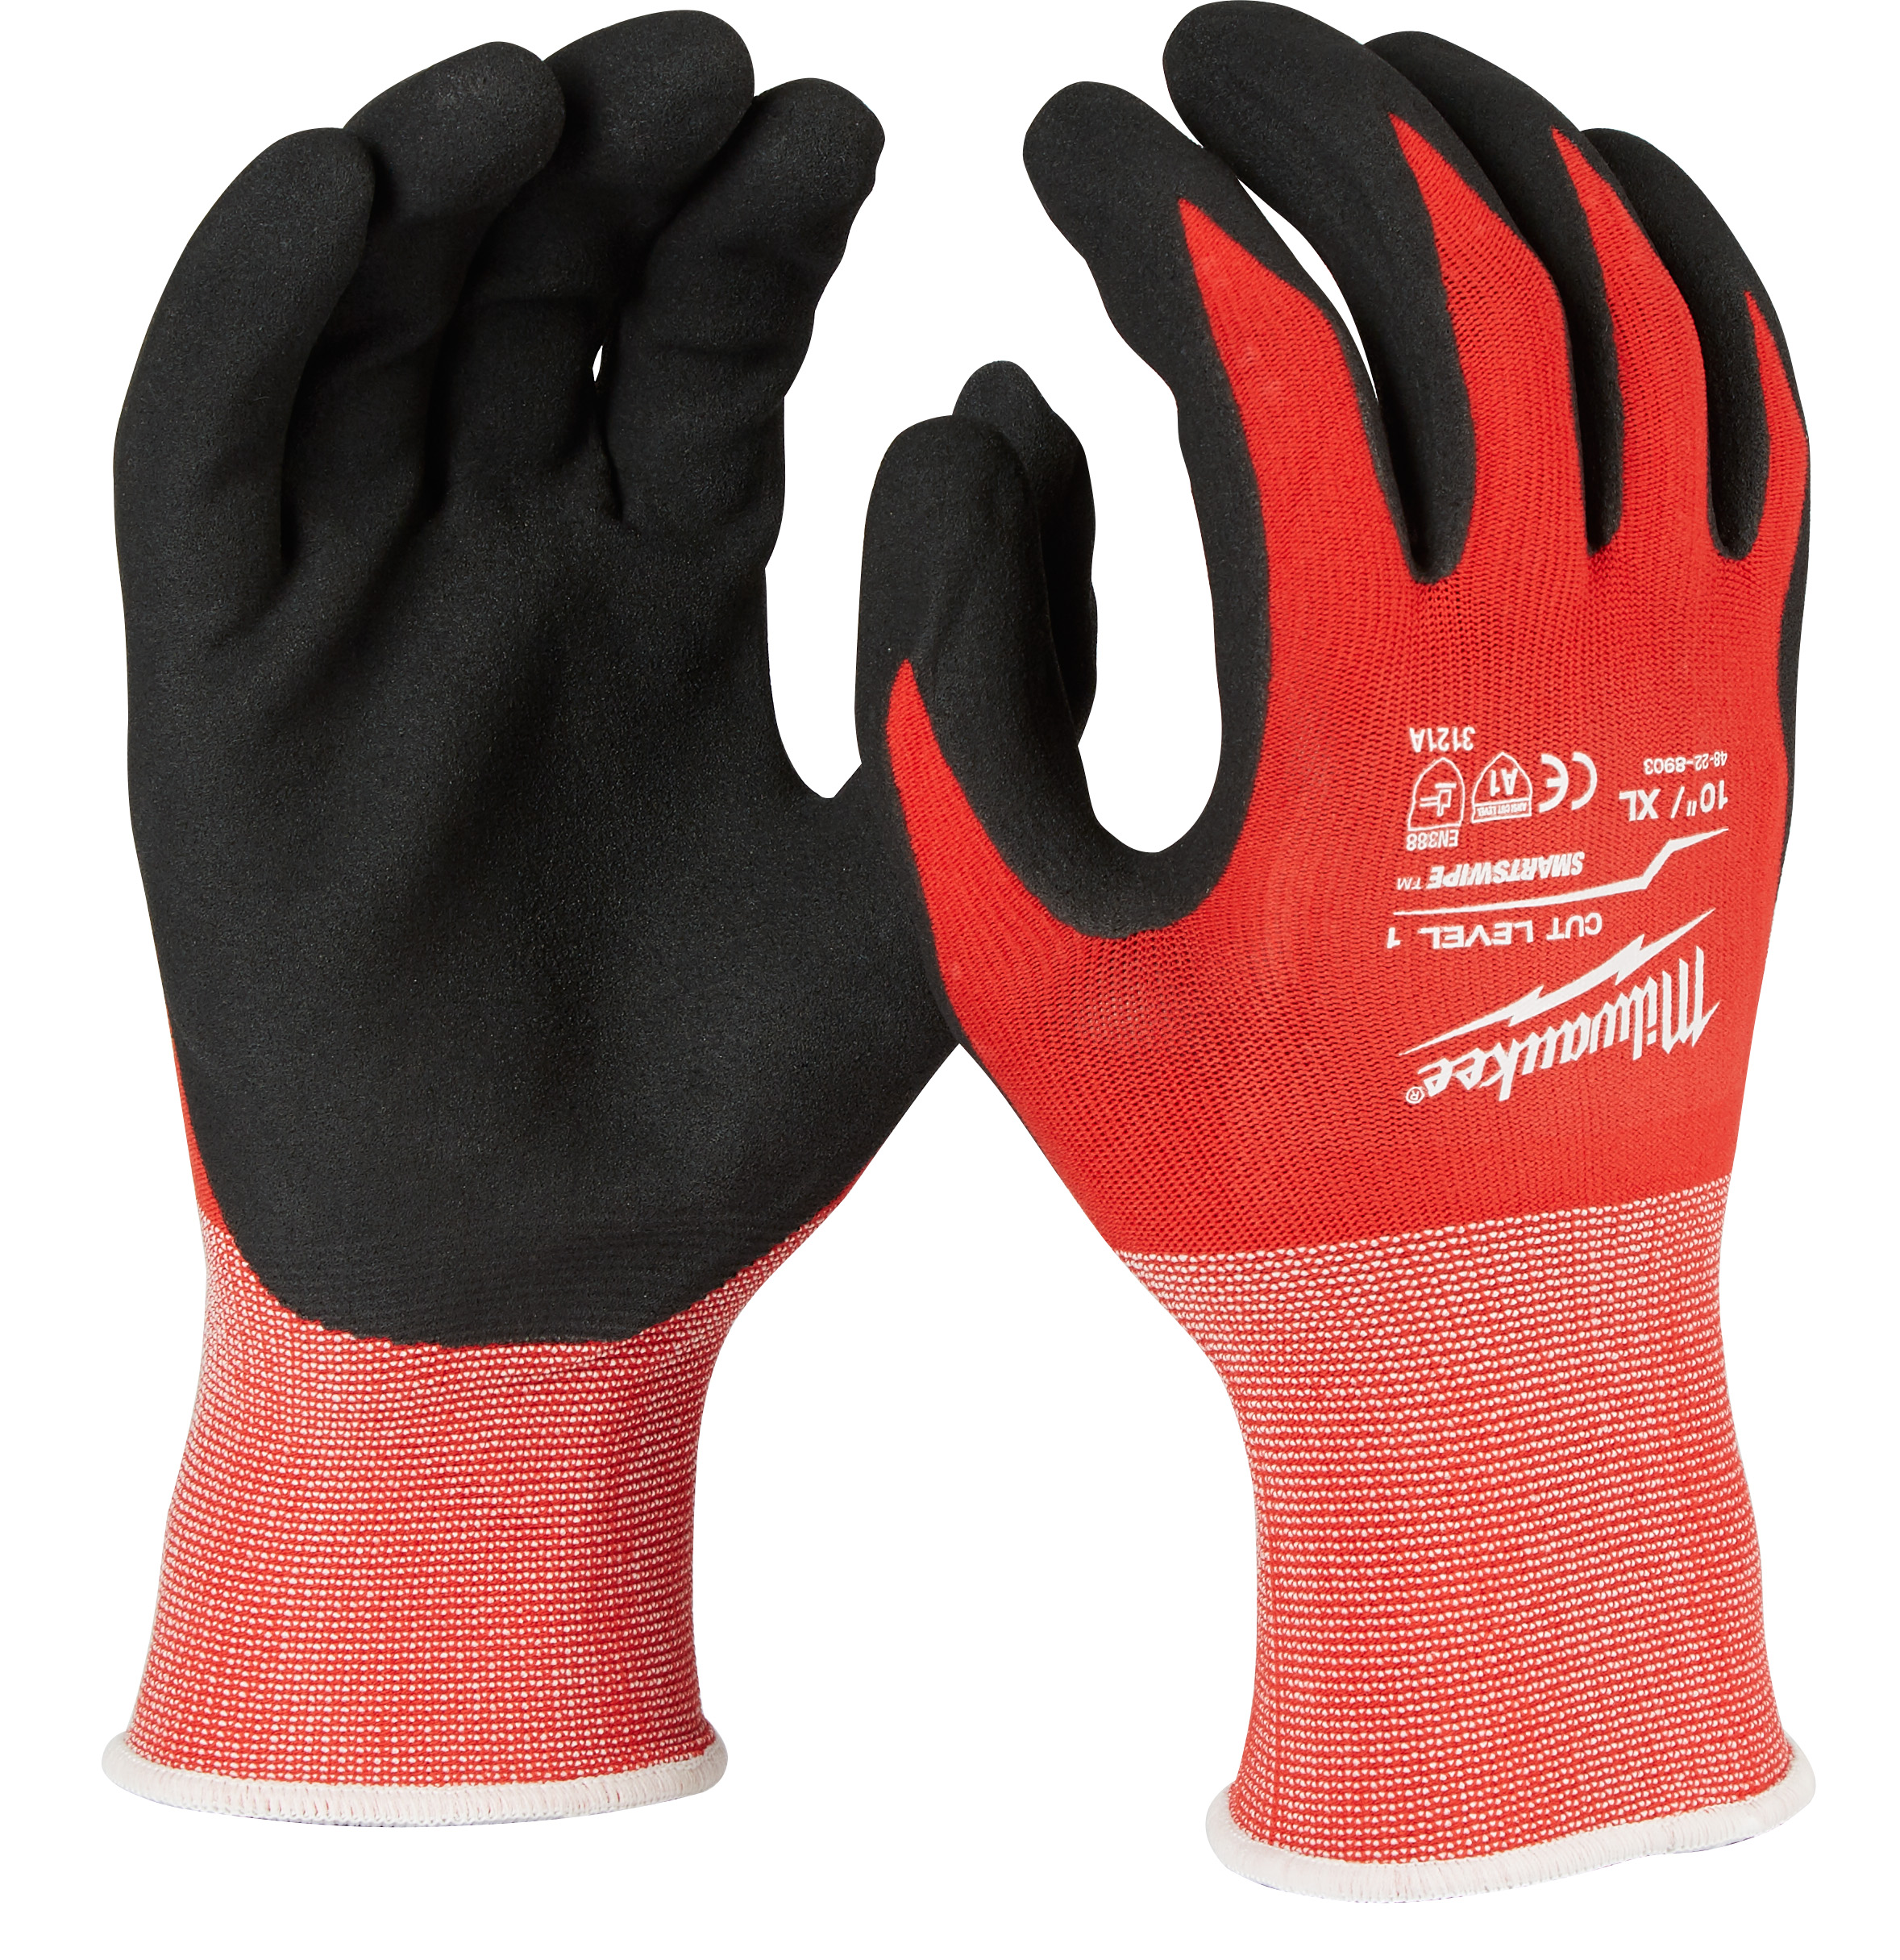 Milwaukee® 48-22-8903 Breathable Unisex Gloves, XL, Nylon/Lycra Blend, Knit Cuff, Resists: Cut and Puncture, ANSI Cut-Resistance Level: A1, ANSI Puncture-Resistance Level: 1